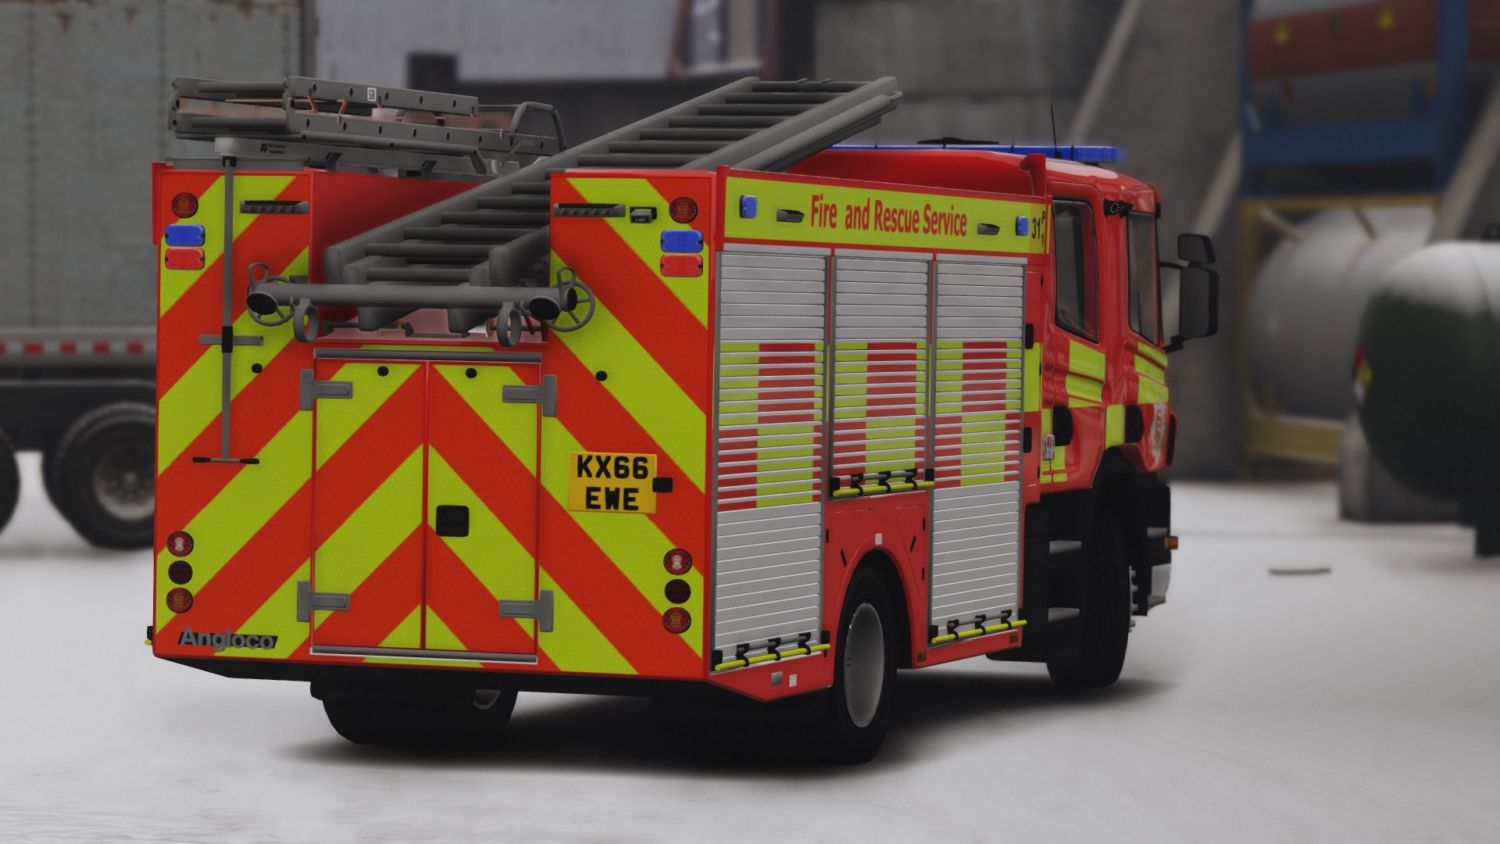 2015 Scania P280 Essex Fire And Rescue Appliance Gta 5 Vehicle Mod